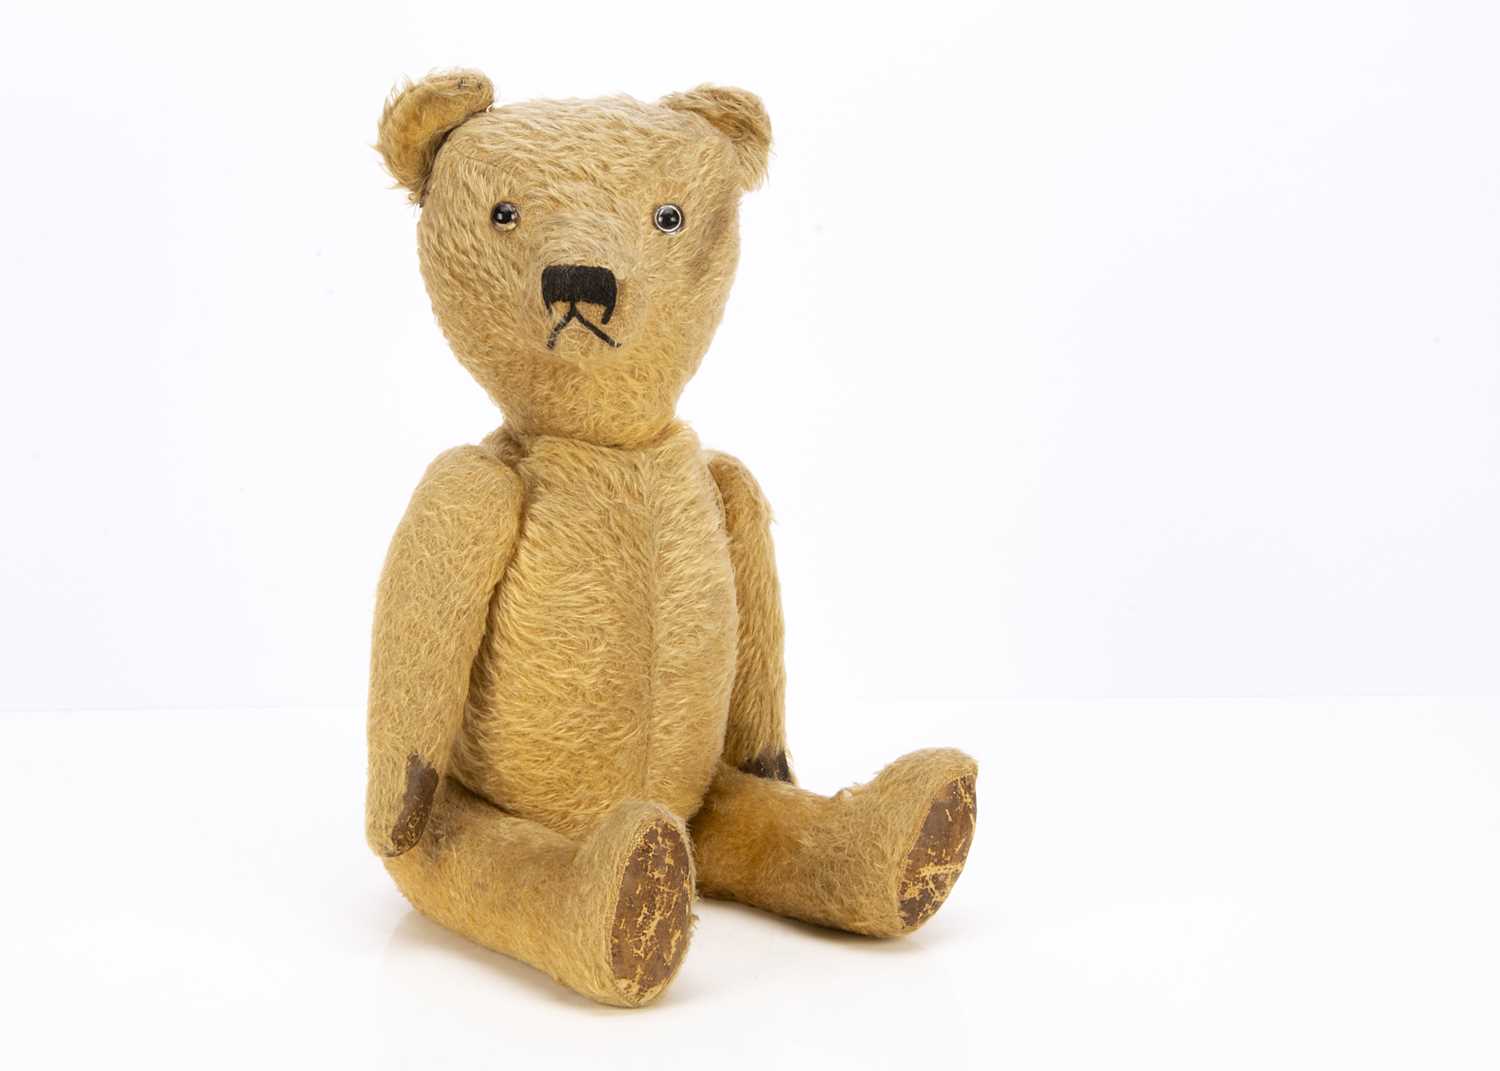 Lot 191 - Teddy Stonehouse - a 1940's British possibly a British overseas territories Teddy Bear